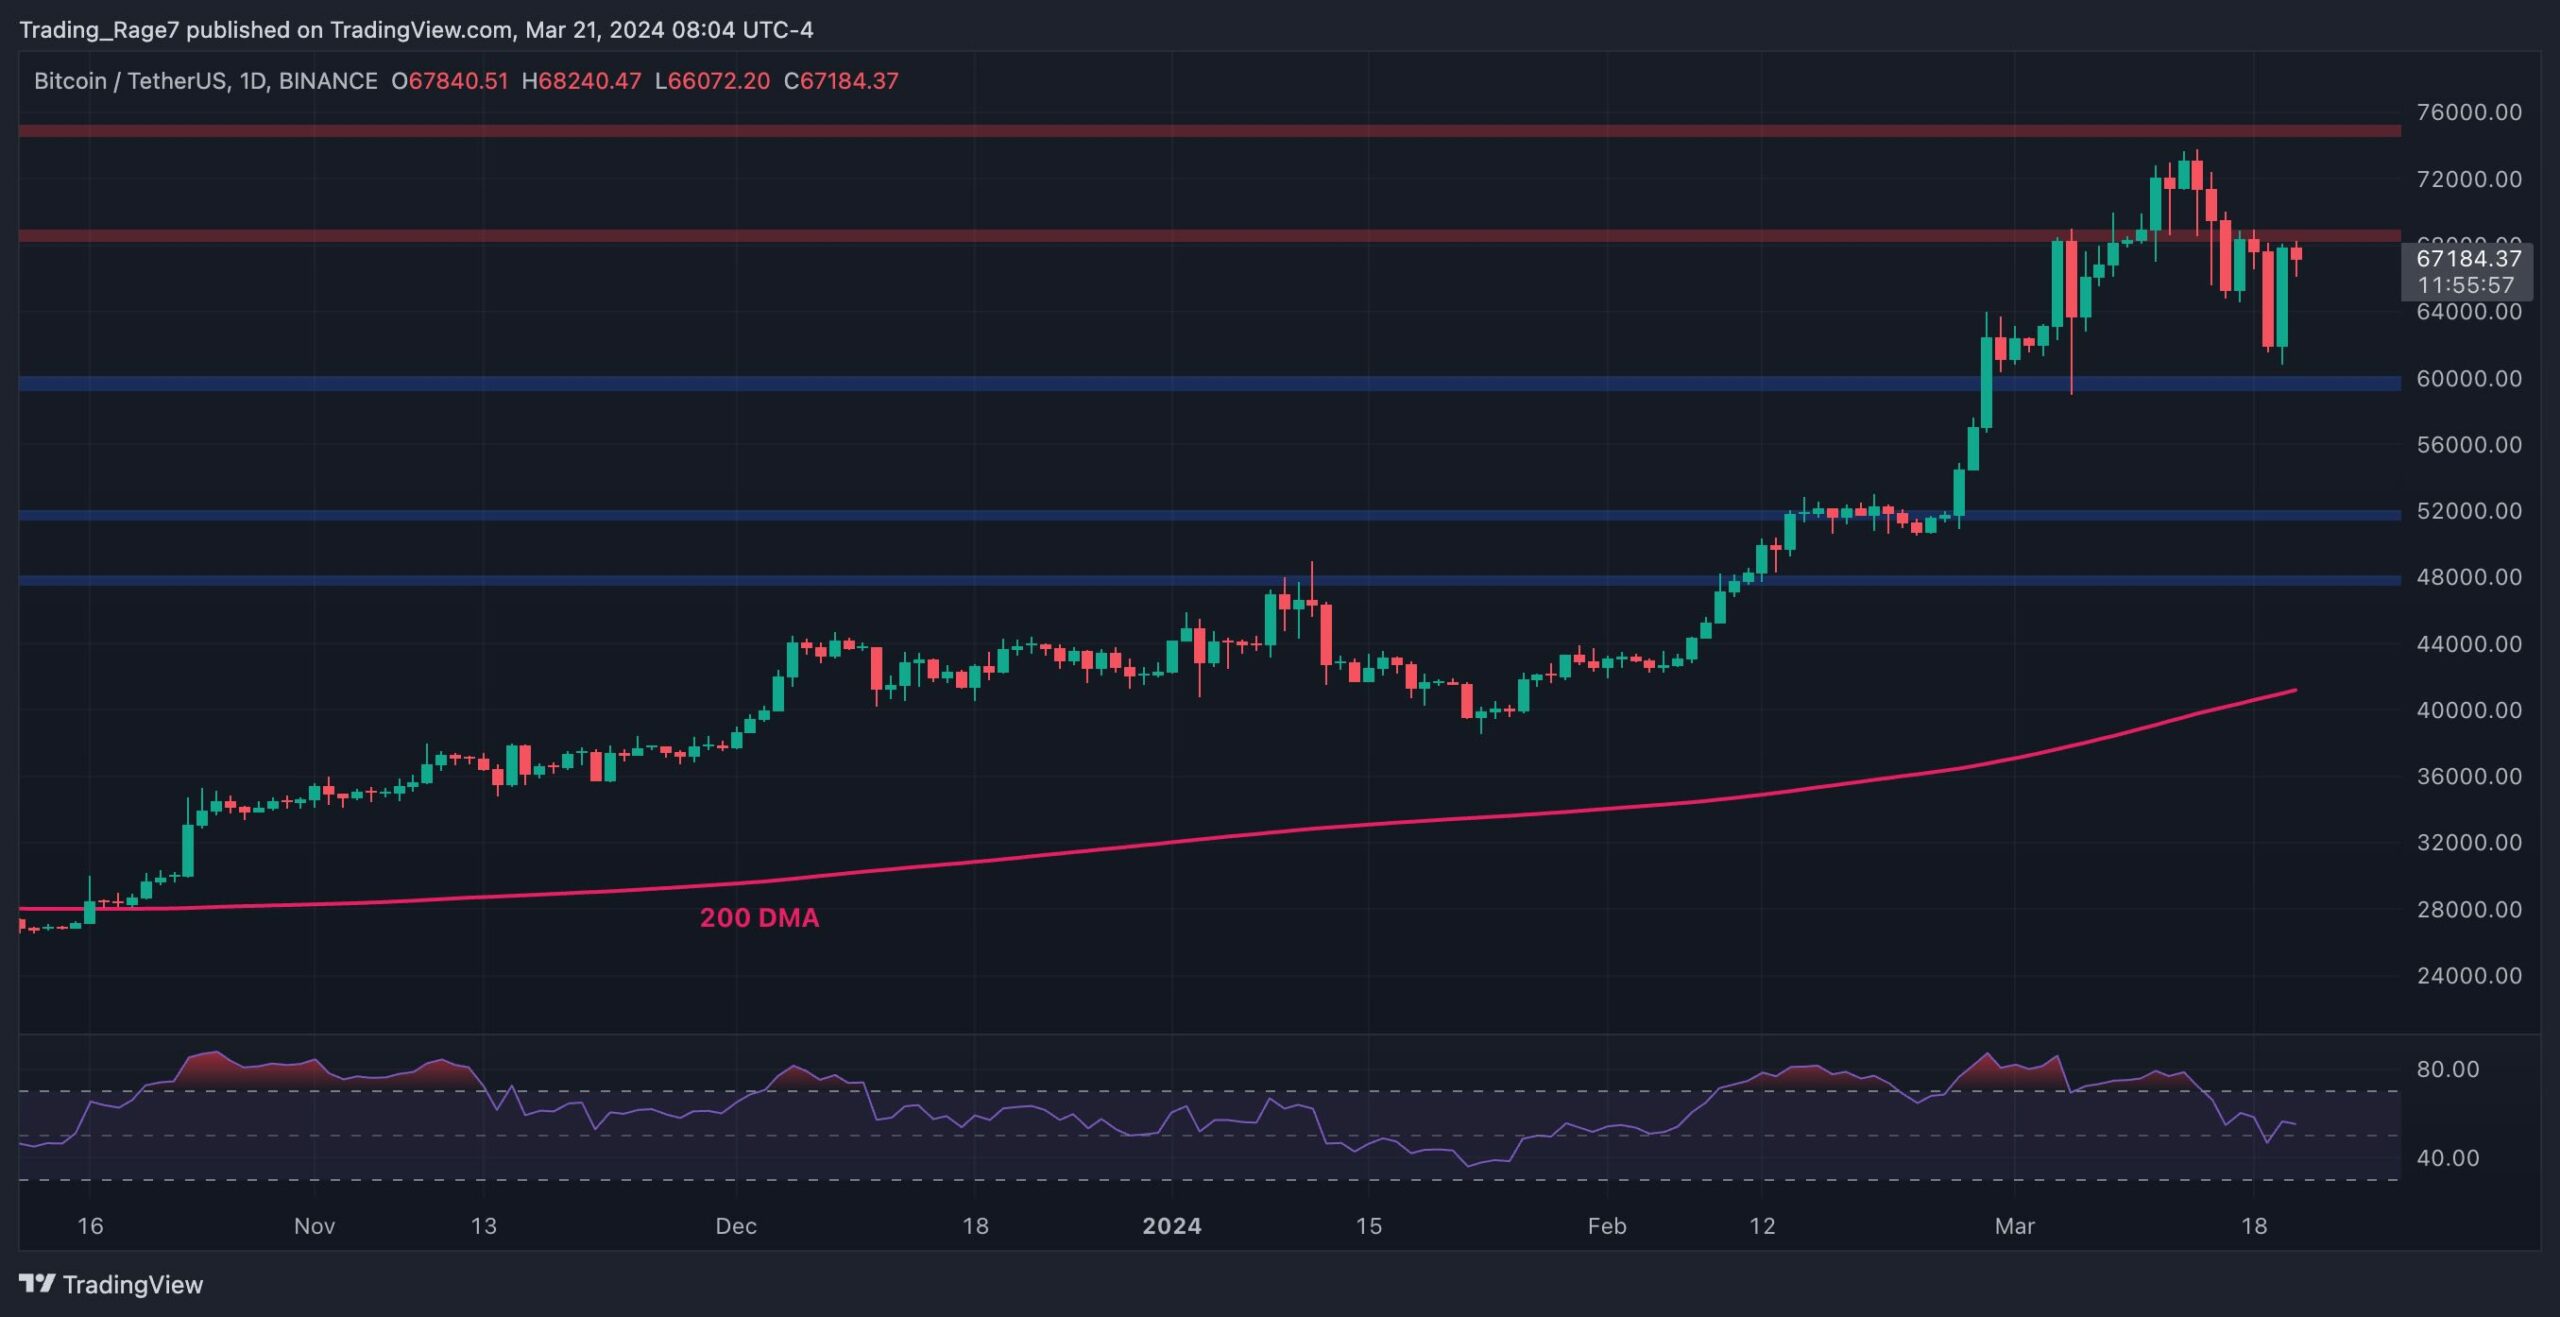 Bitcoin-price-analysis:-is-btc-ready-to-explode-to-a-new-ath-following-the-recent-correction?